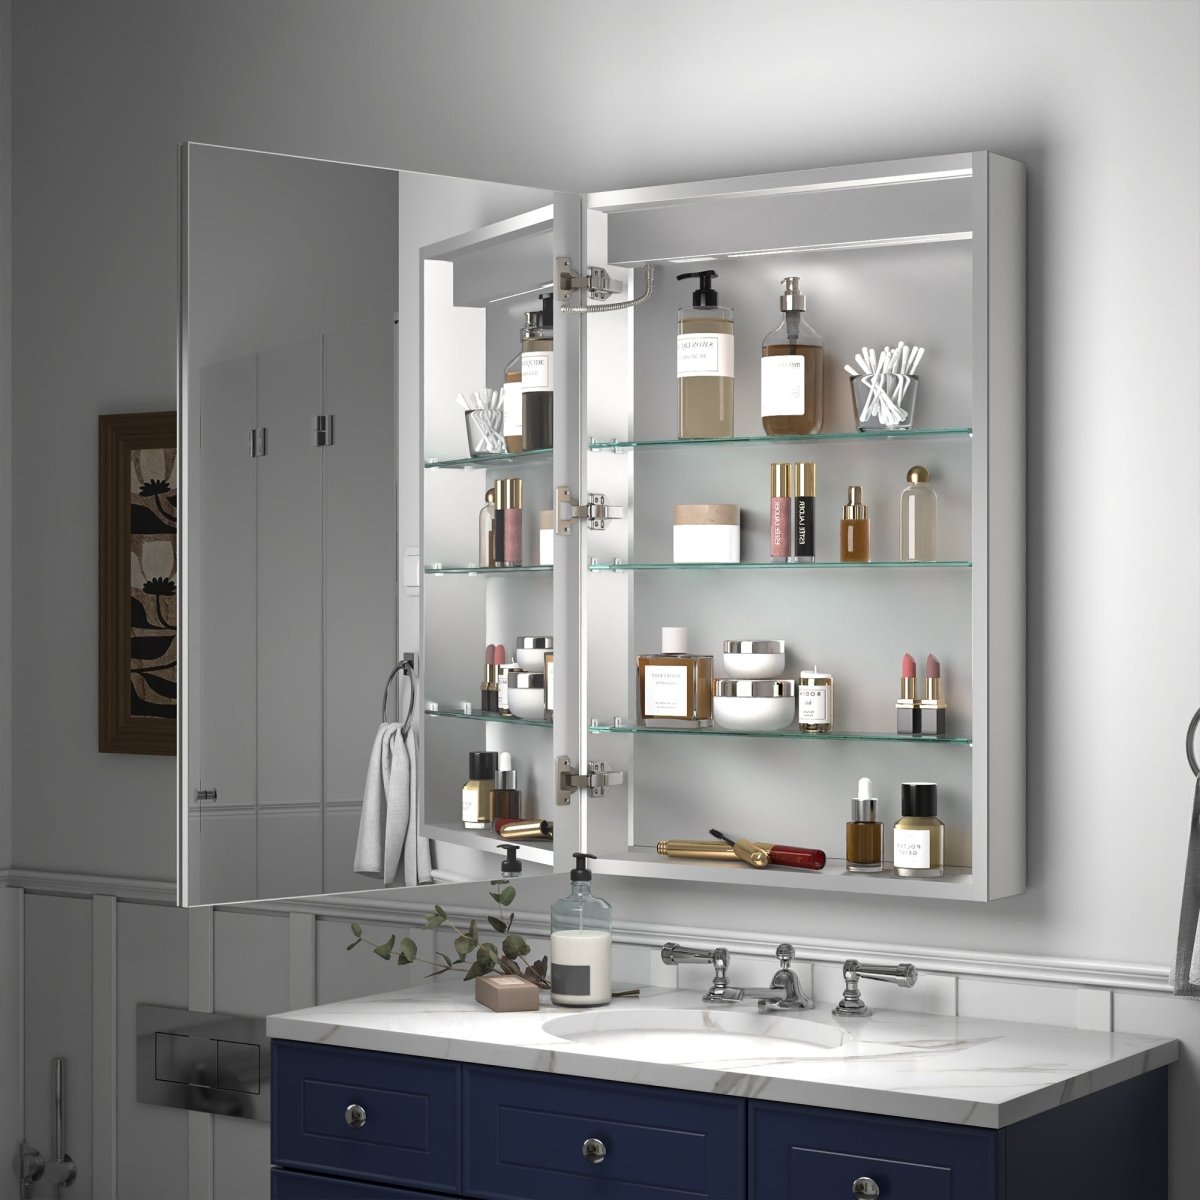 Rim 24" W x 36" H Led Lighted Medicine Cabinet Recessed or Surface with Mirrors, Hinge On The Left